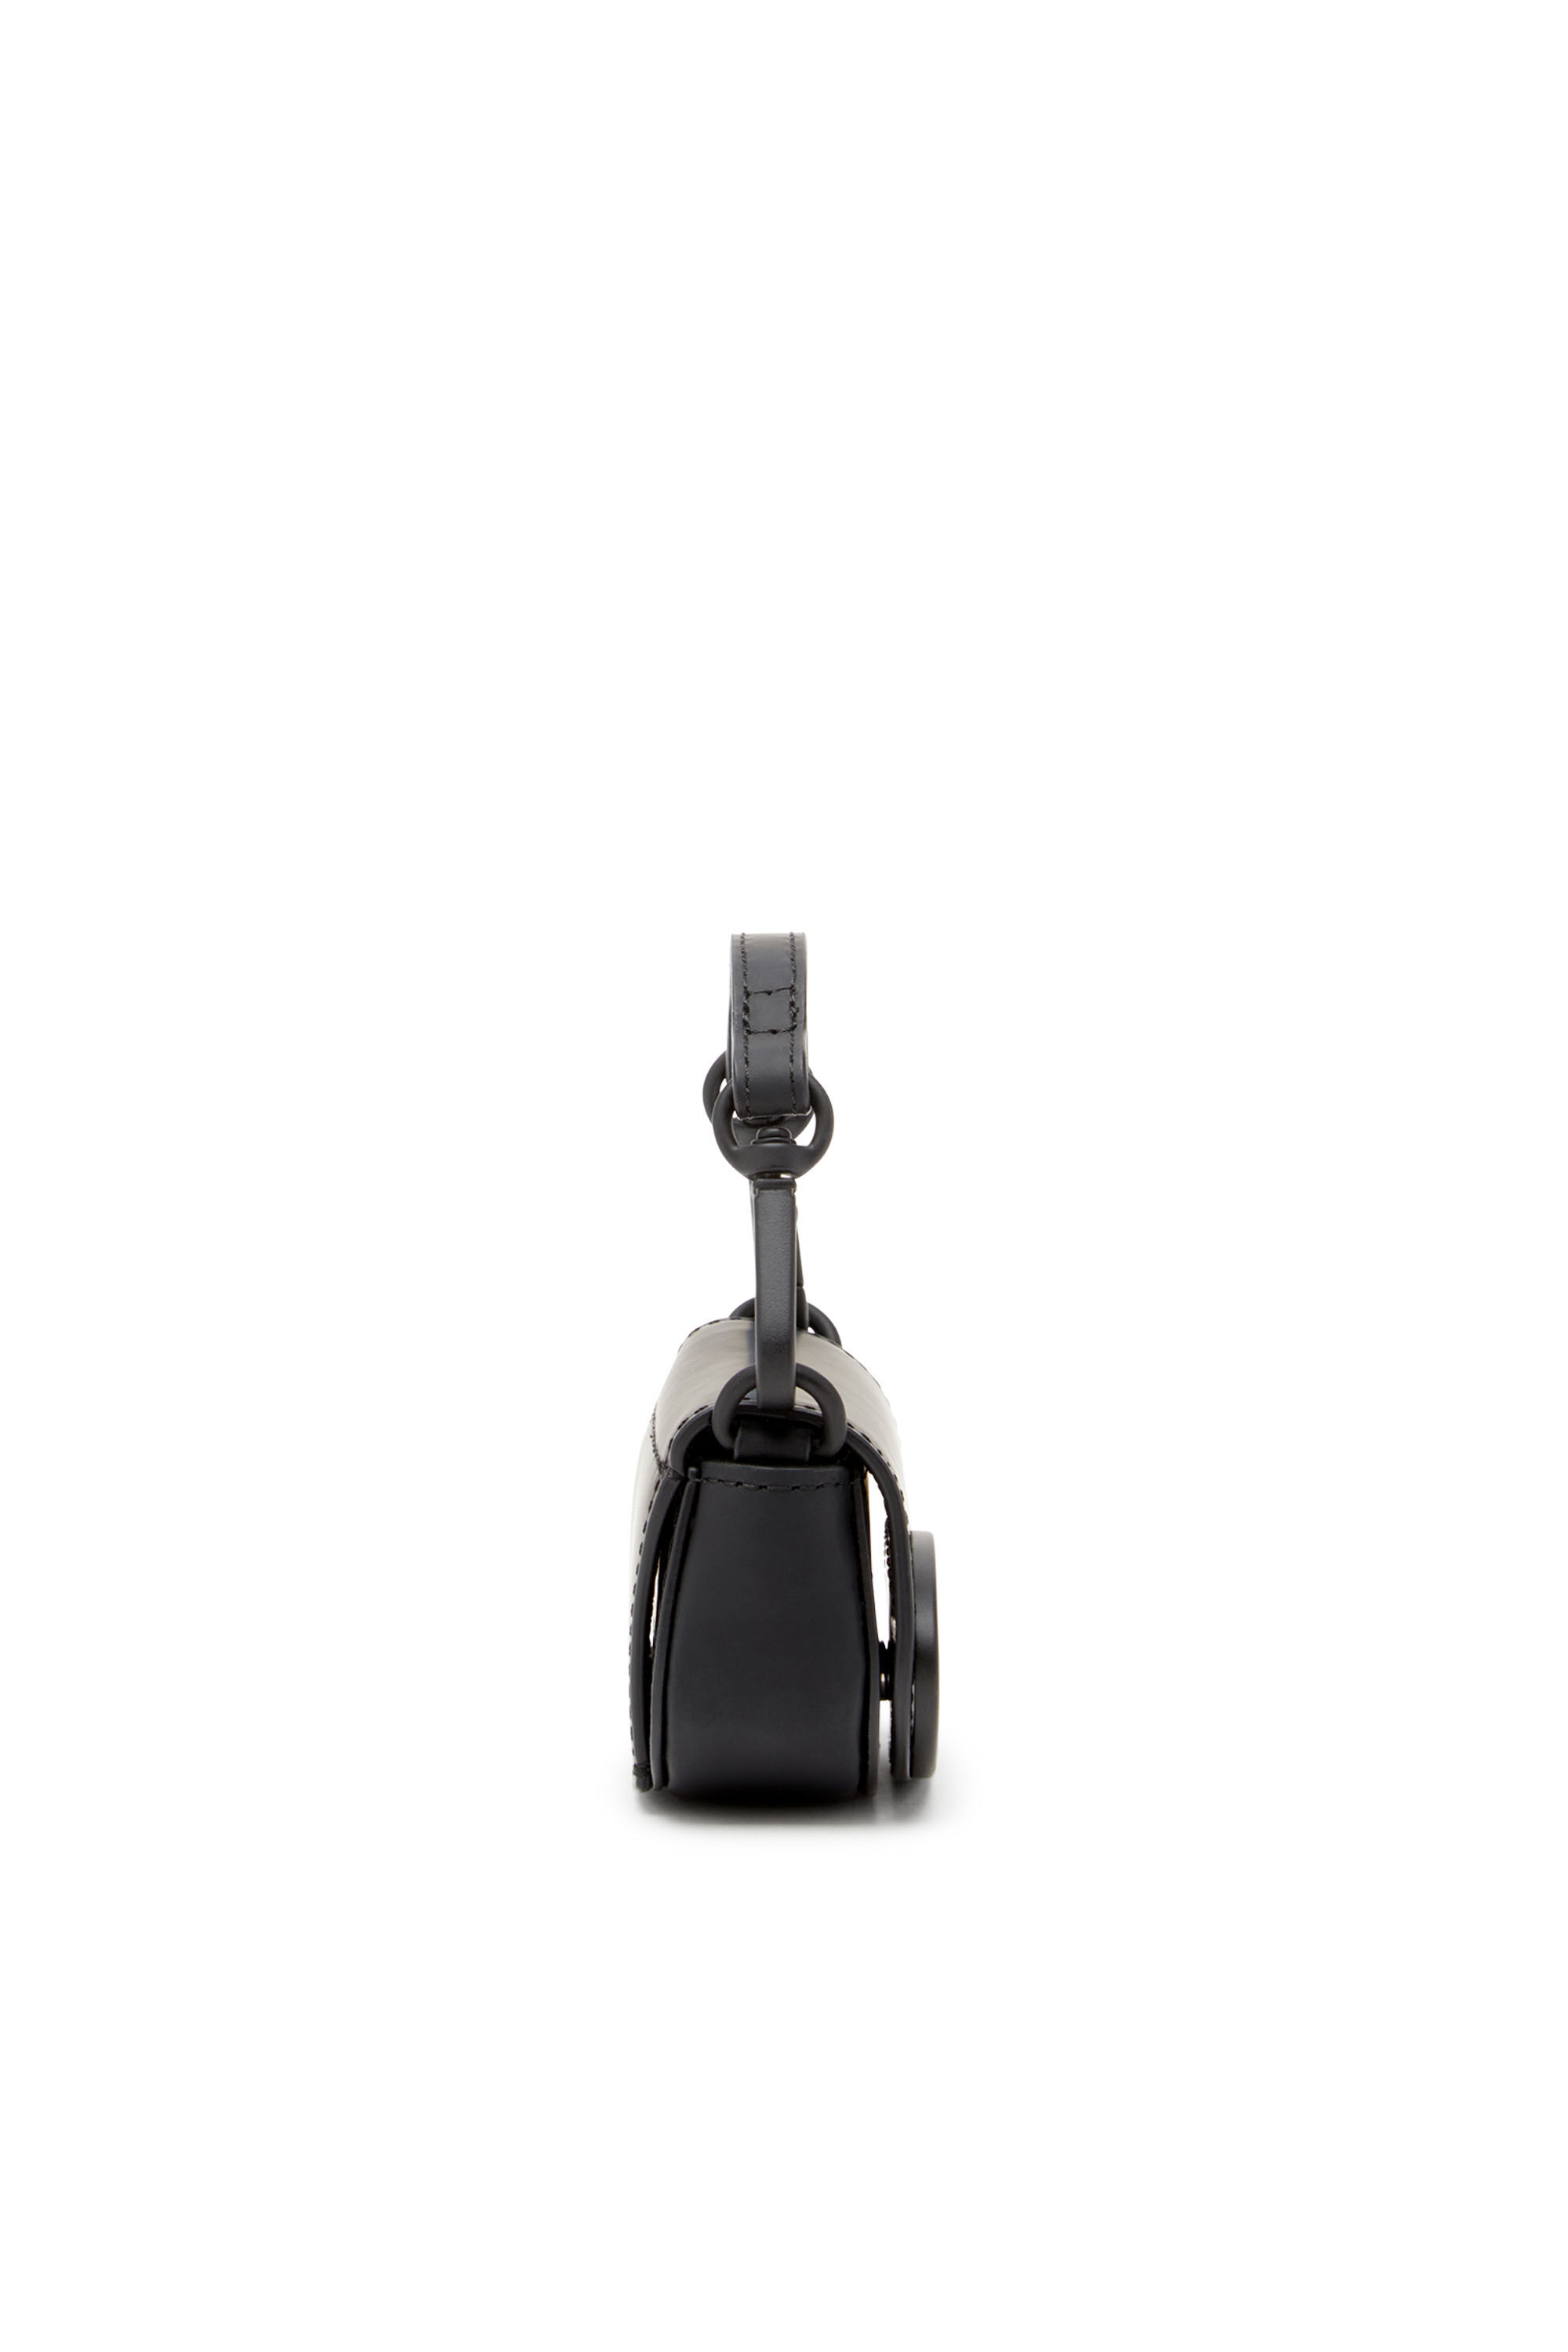 Diesel - 1DR XXS CHAIN, Female Iconic micro bag charm in matte leather in Black - Image 3